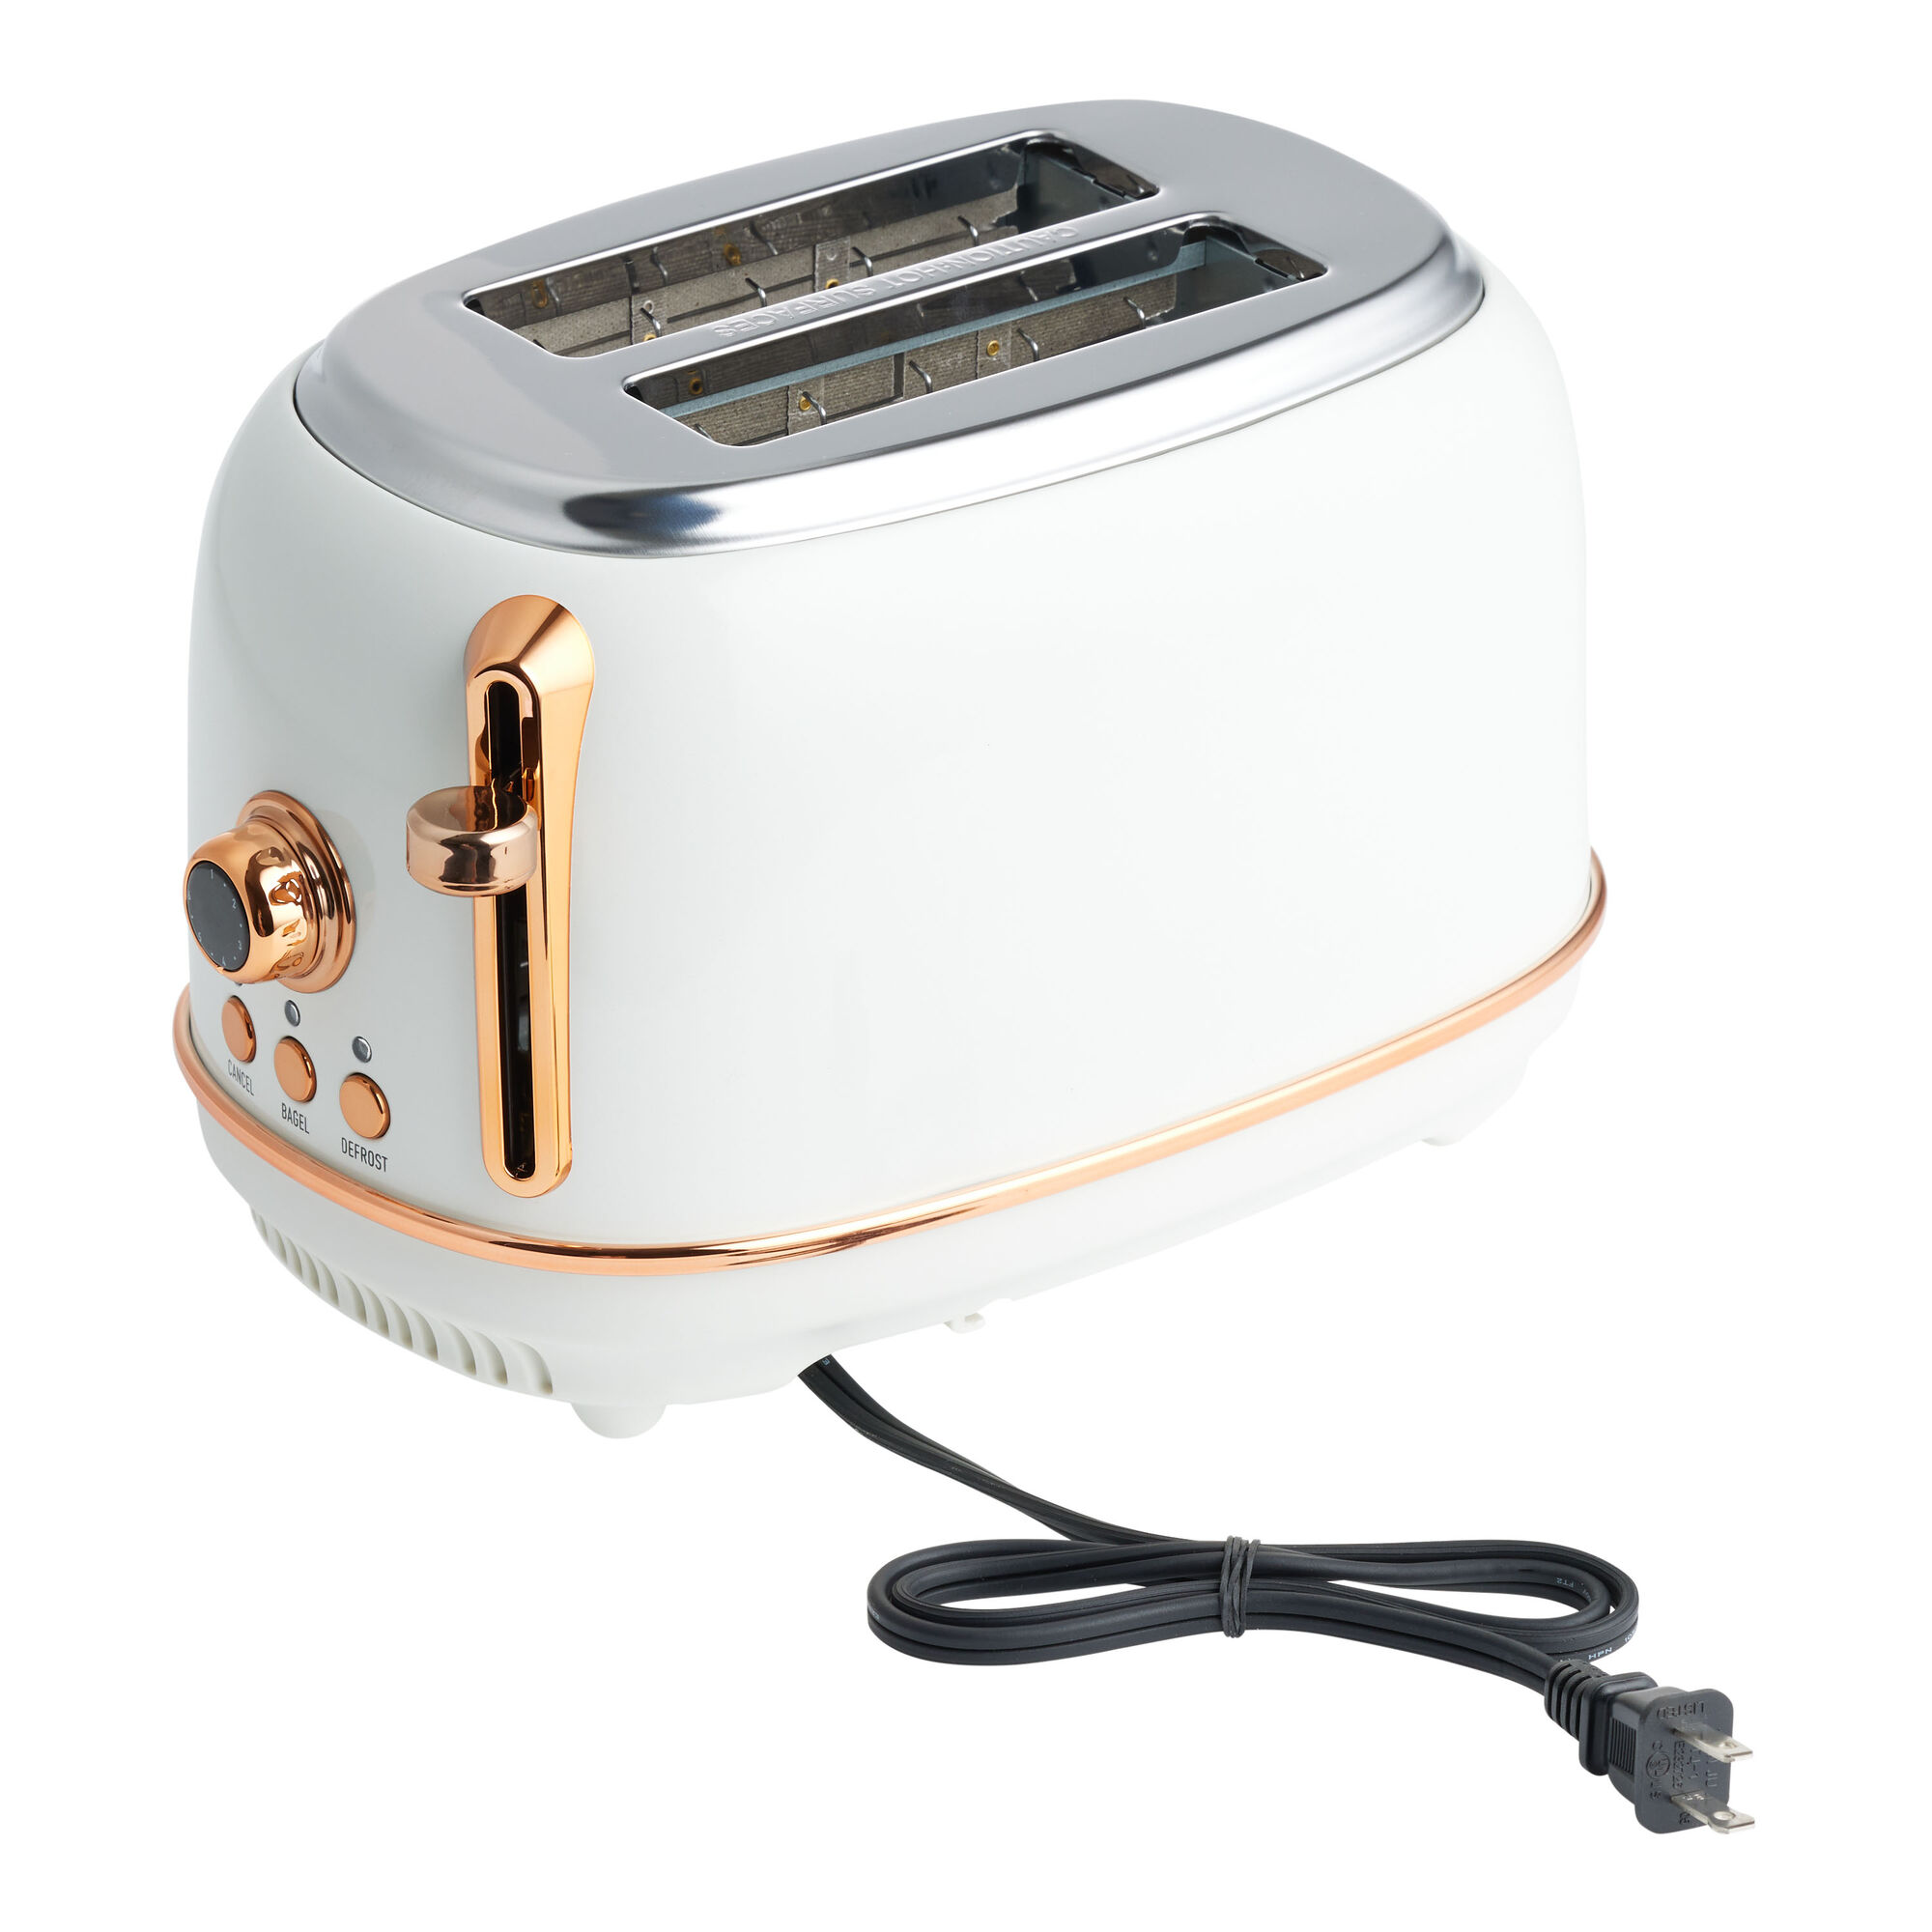 Haden Ivory and Copper Heritage 2 Slice Wide Slot Toaster - World Market